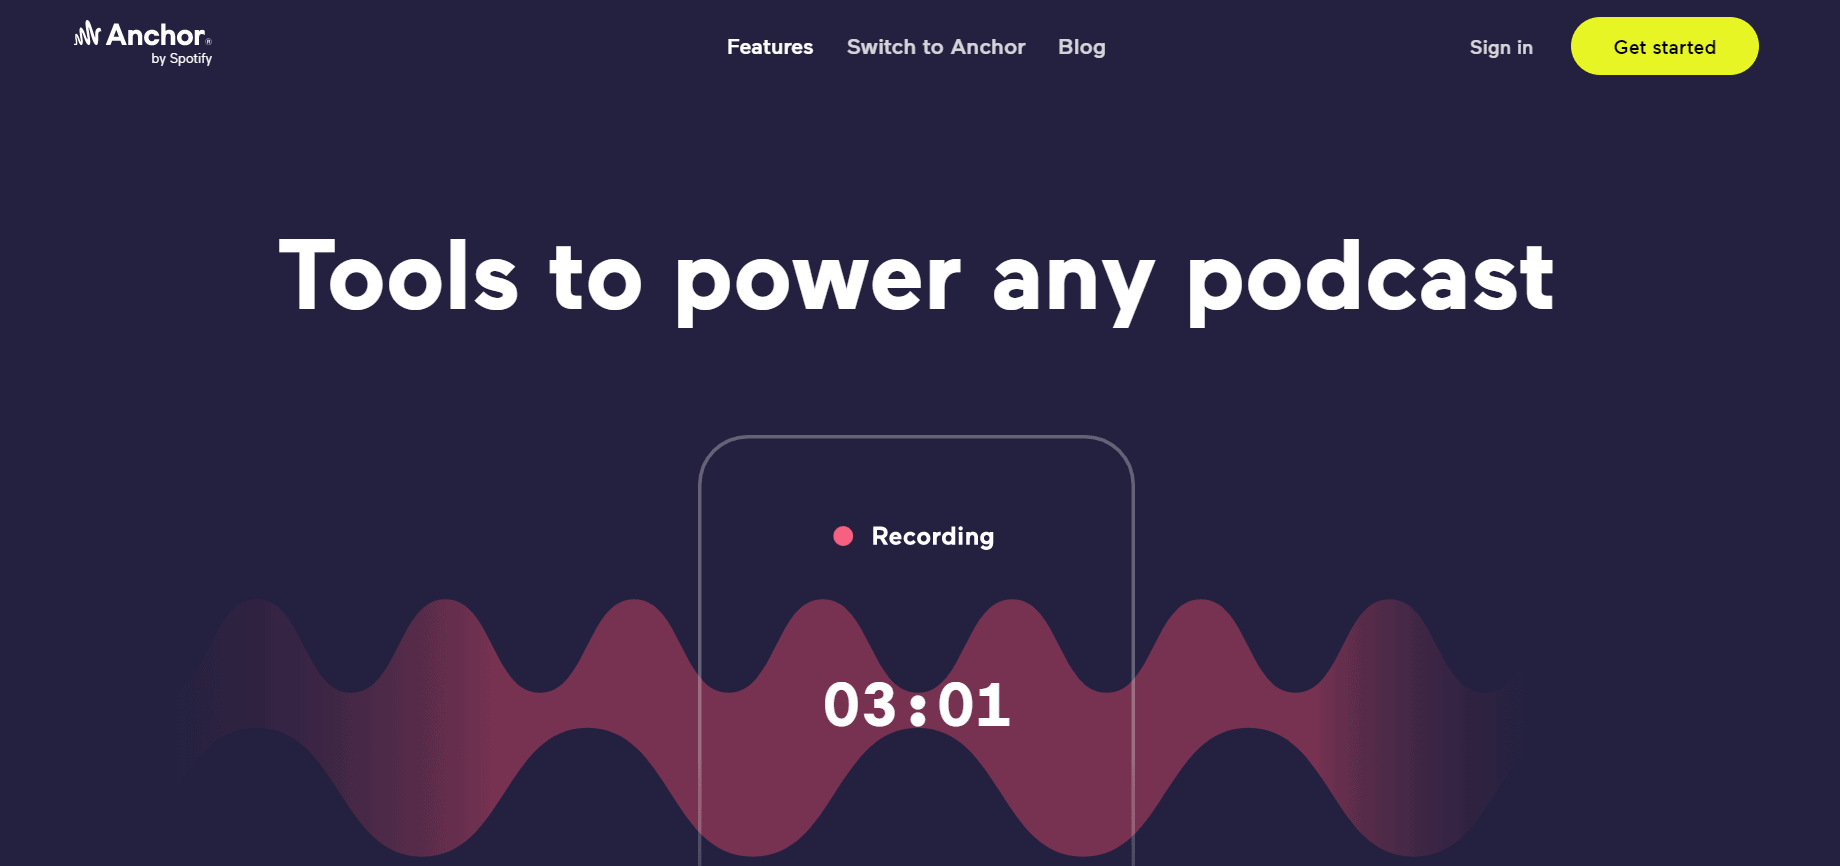 Podcast distribution software - Anchor